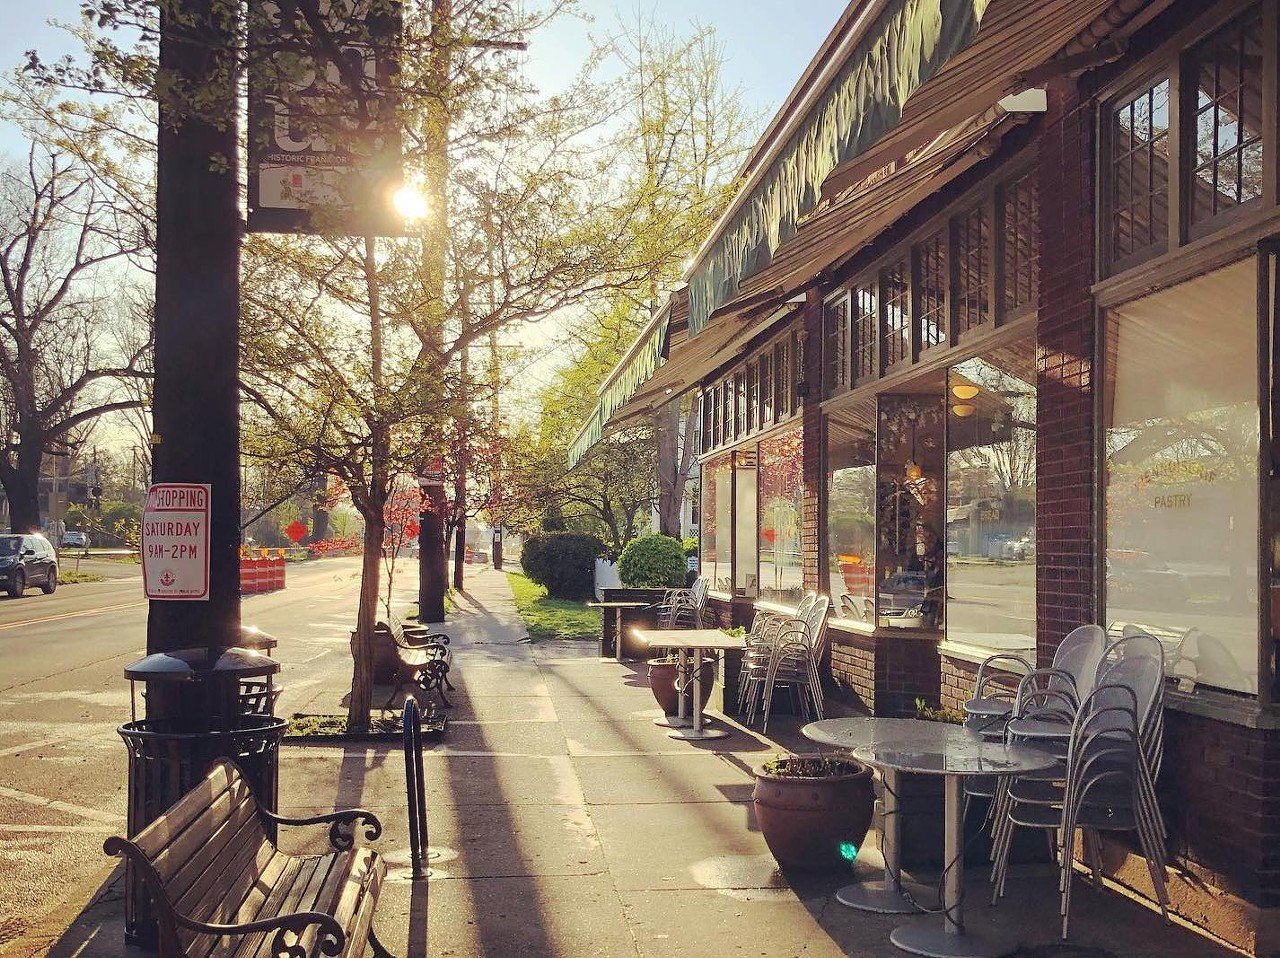 Blue Dog Bakery & Cafe2868 Frankfort Ave.Enjoy fresh baked bread on the European-style patio while you people along Frankfort Avenue.